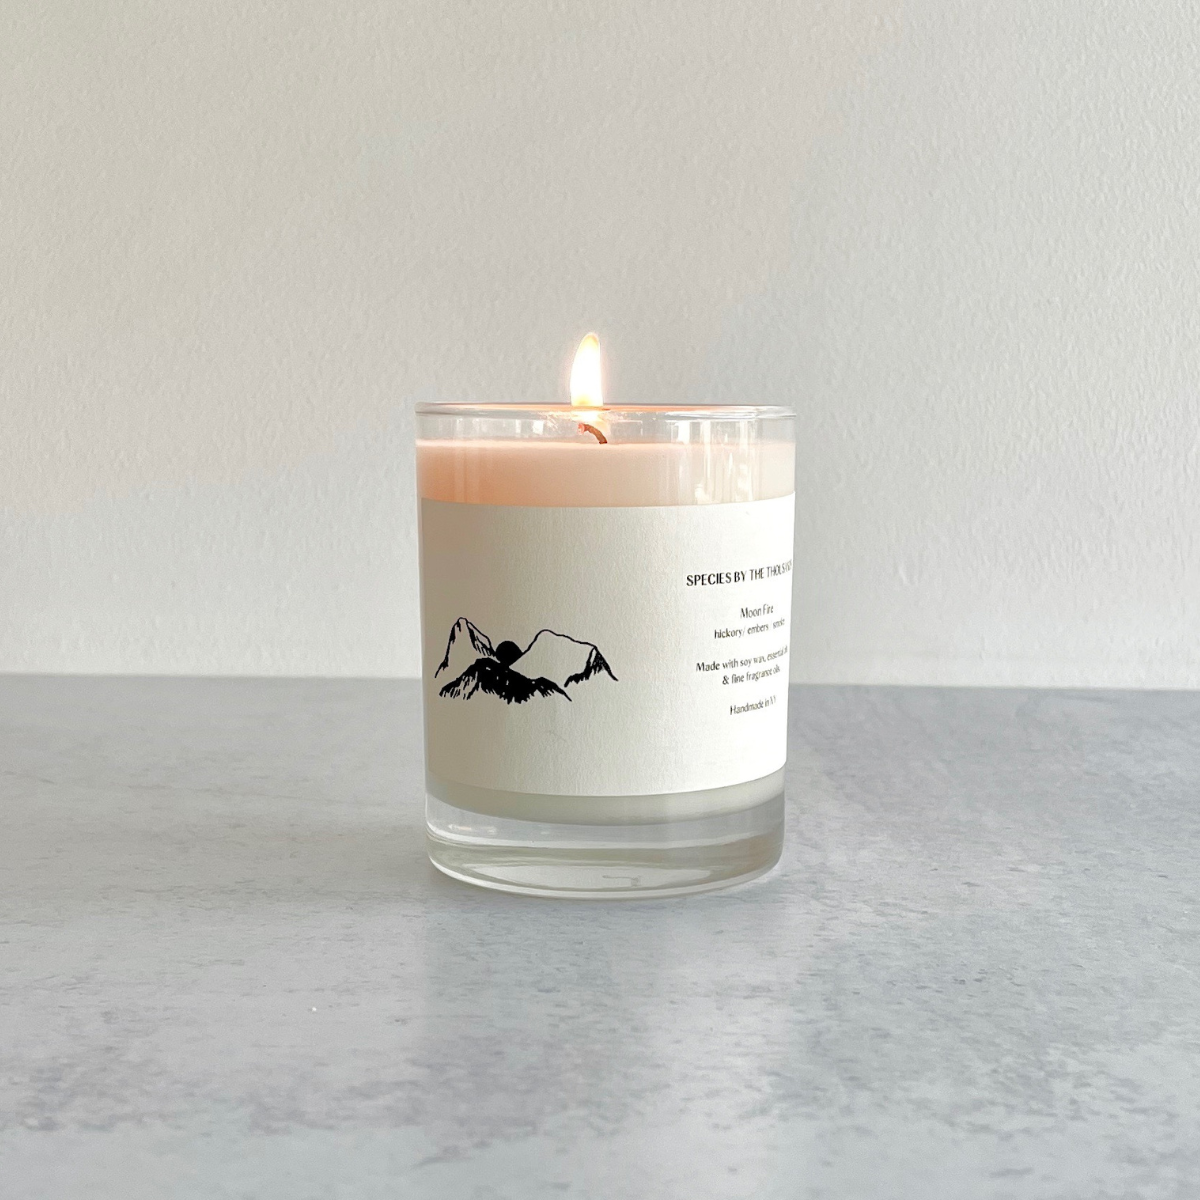 Moon Fire - Hickory, Embers, and Smoke Soy Candle